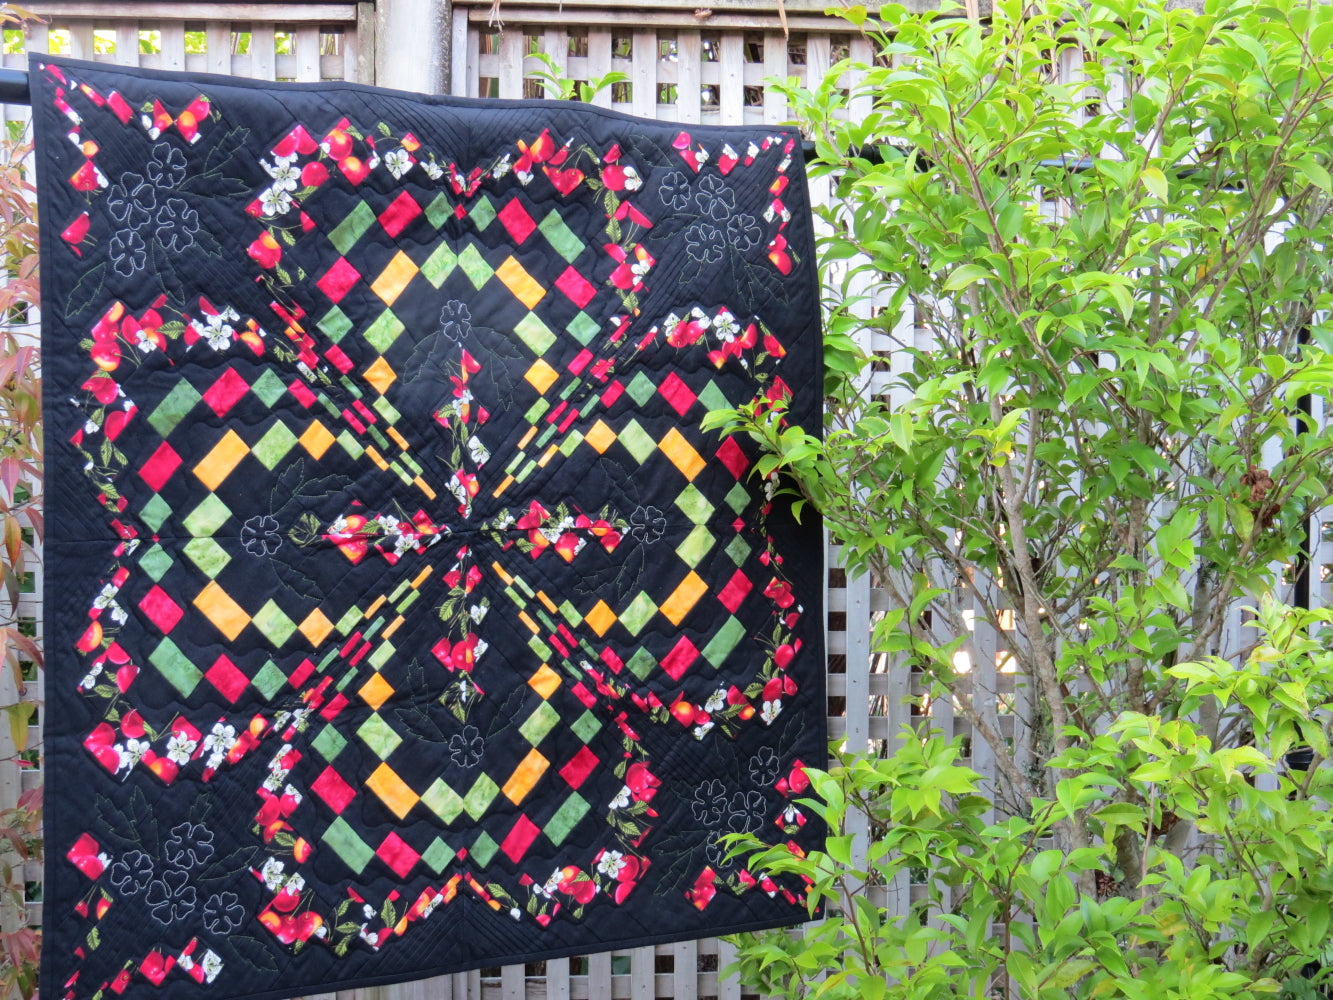 Bargello quilt pattern cut apart and twisted to create a stunning quilt design with quilting pattern included